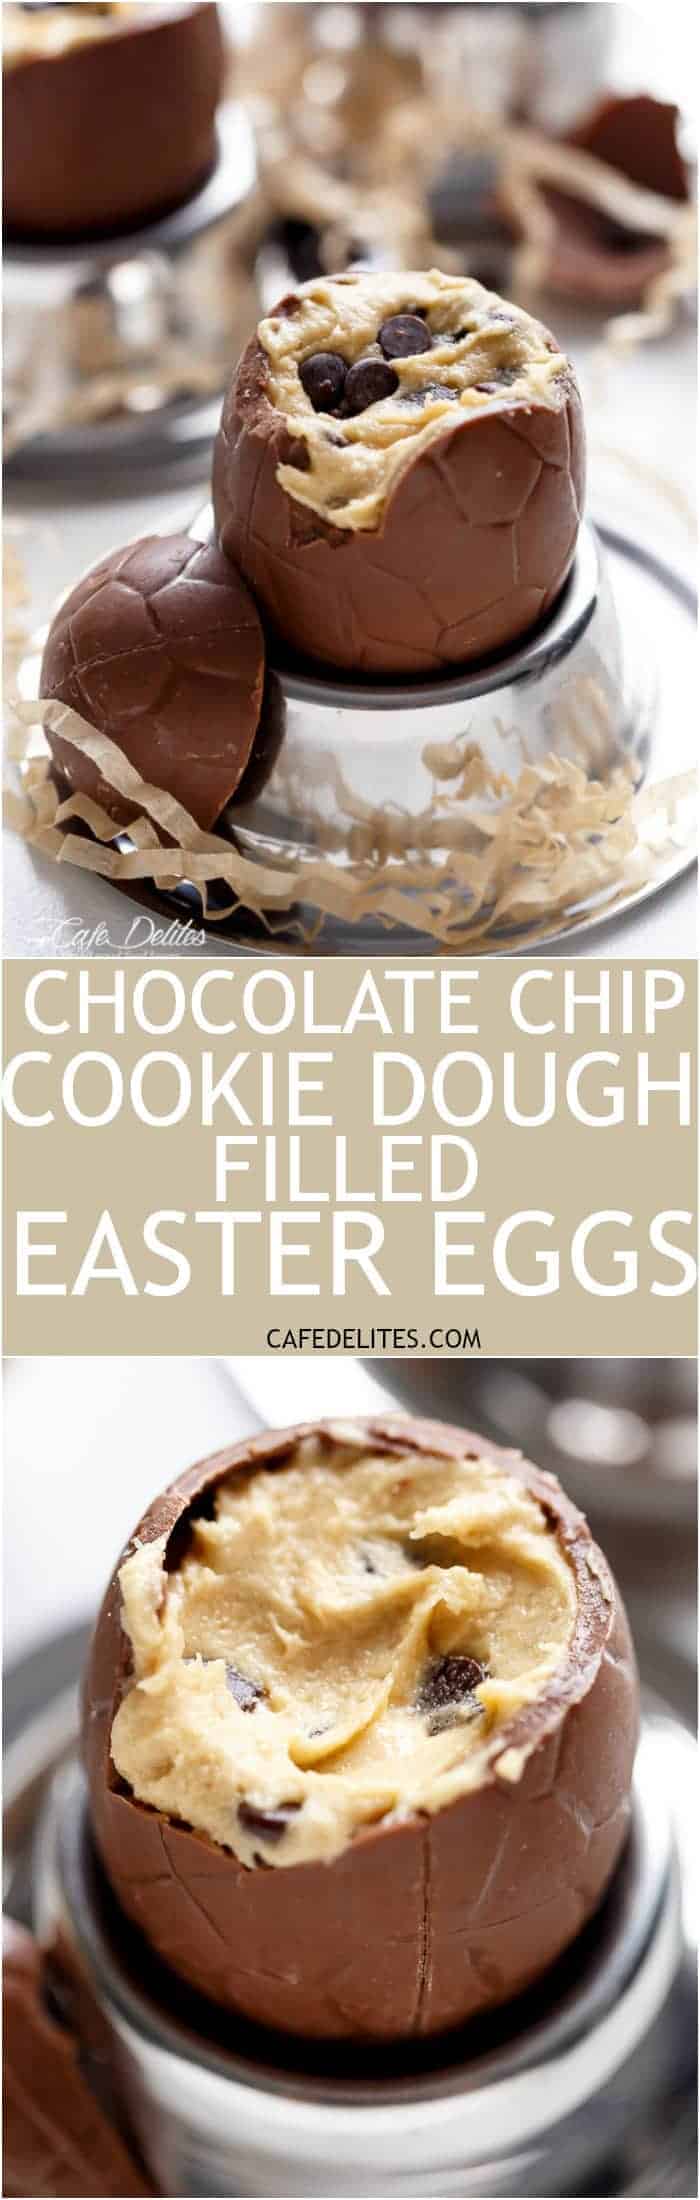 Chocolate Chip Cookie Dough Filled Easter Eggs! Perfect for any event, party OR to use up those Easter eggs in a completely decadent way! | https://cafedelites.com